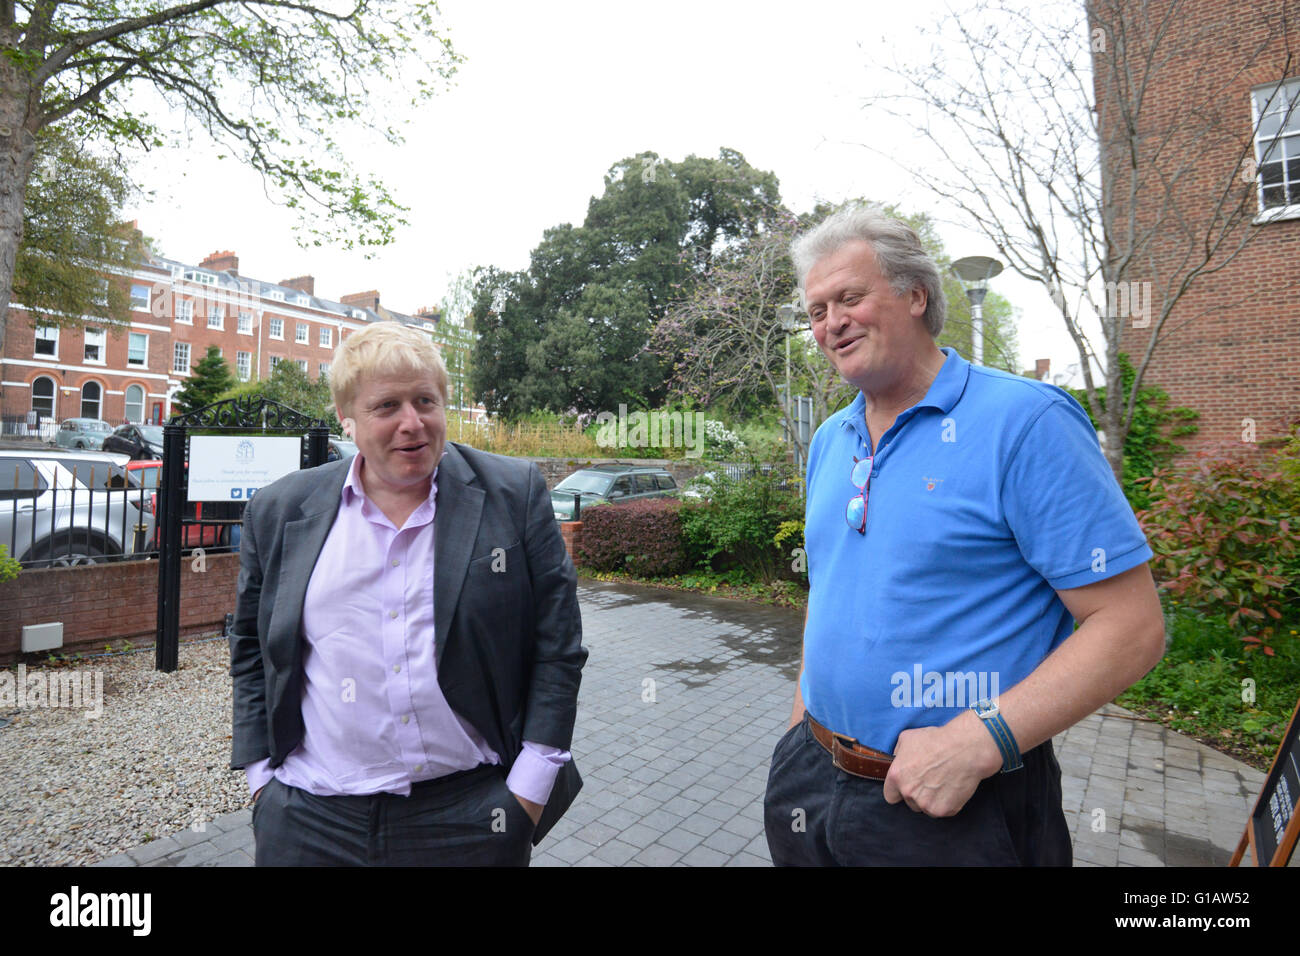 BORIS JOHNSON Meets TIM MARTIN on day of Brexit Announcement, Boris goes on to become Prime Minister after a series of donations from Tim Martin to the conservative party Stock Photo